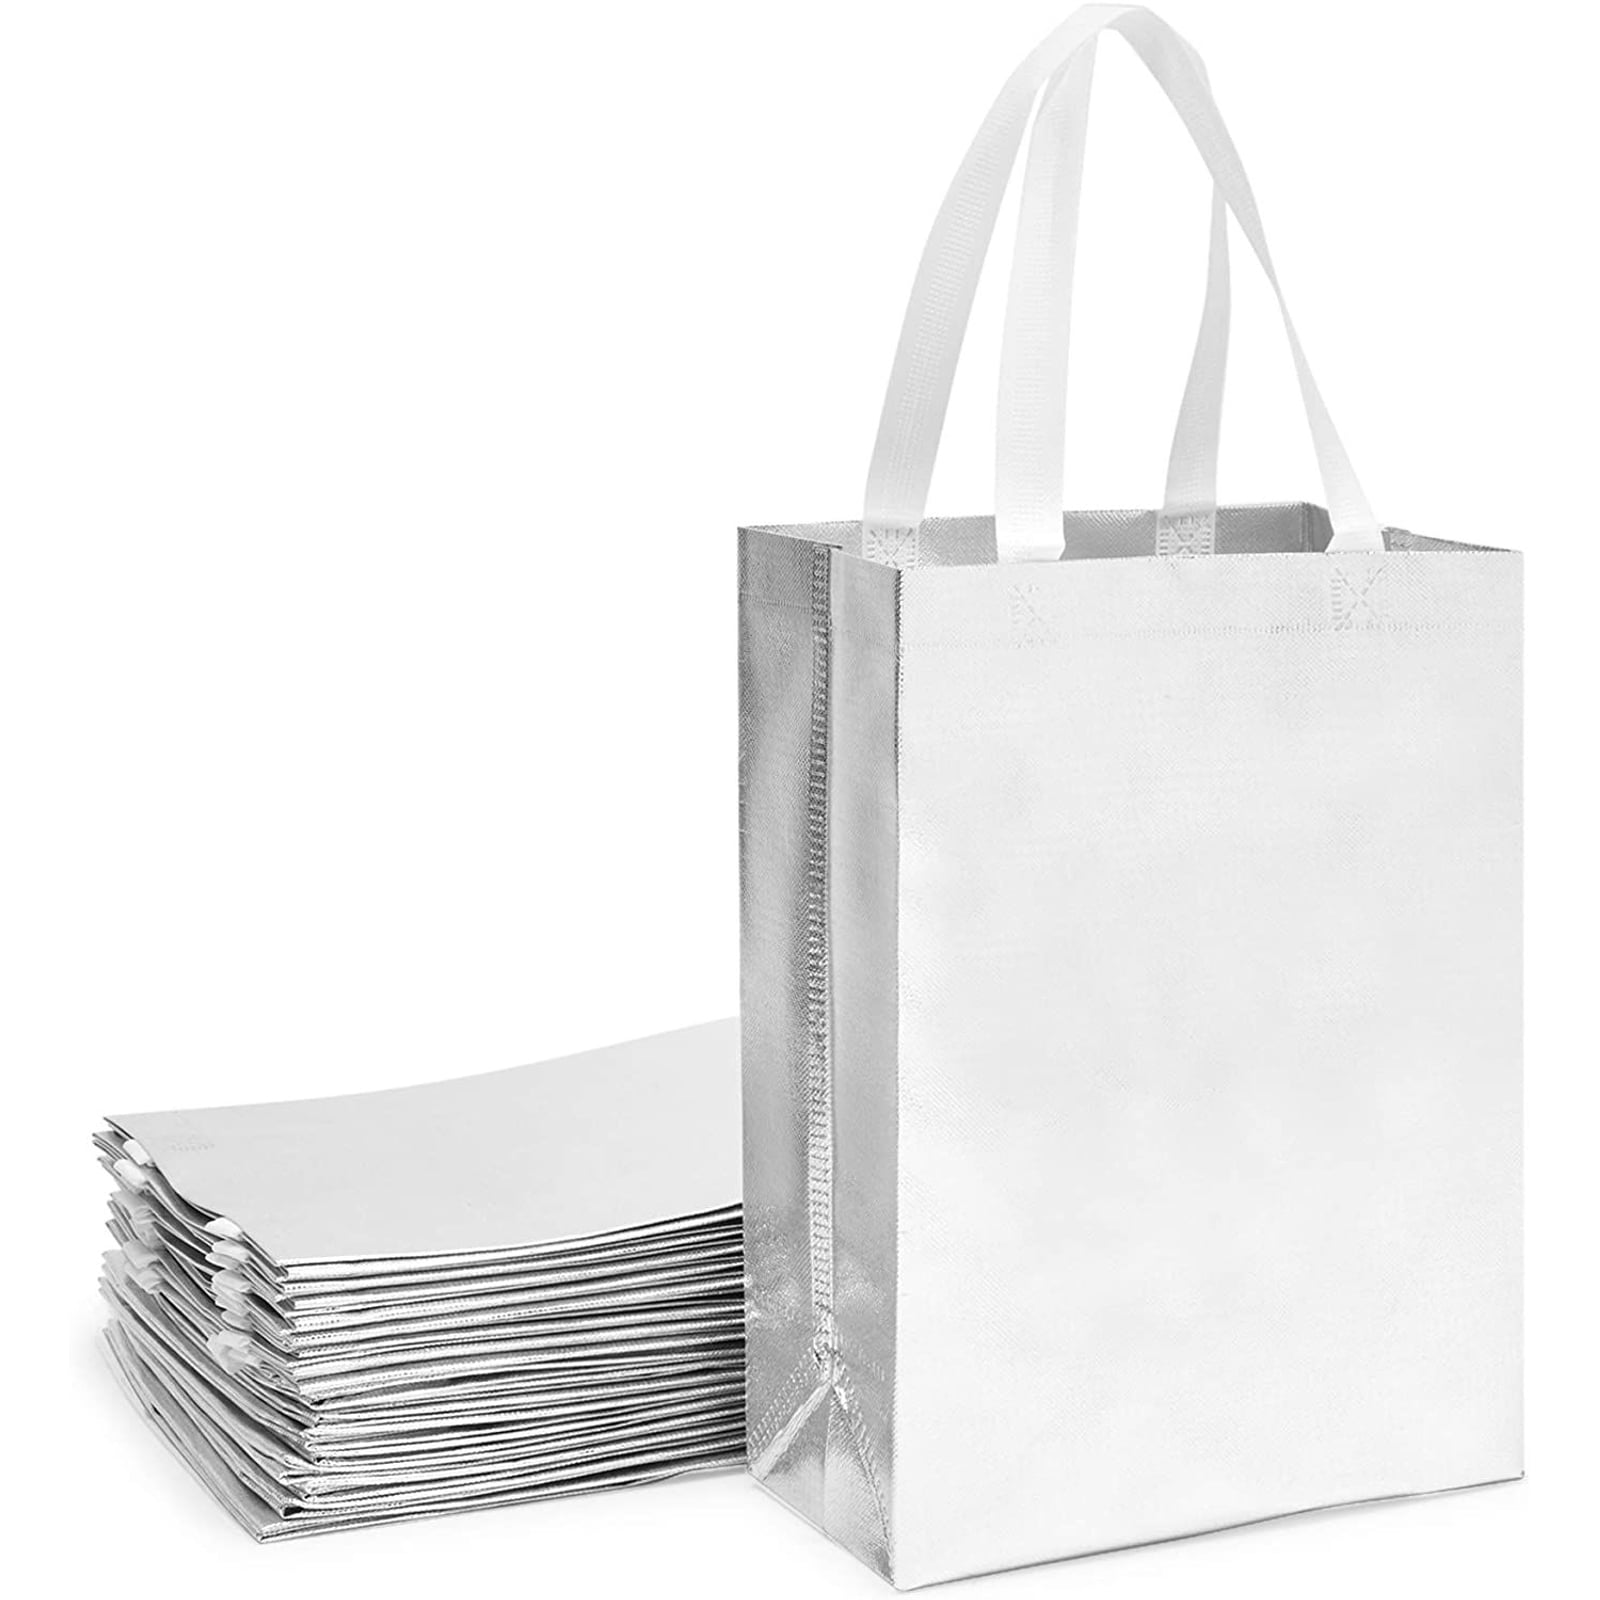 Steel Gray Reusable Grocery Tote Bag Large 10 Pack